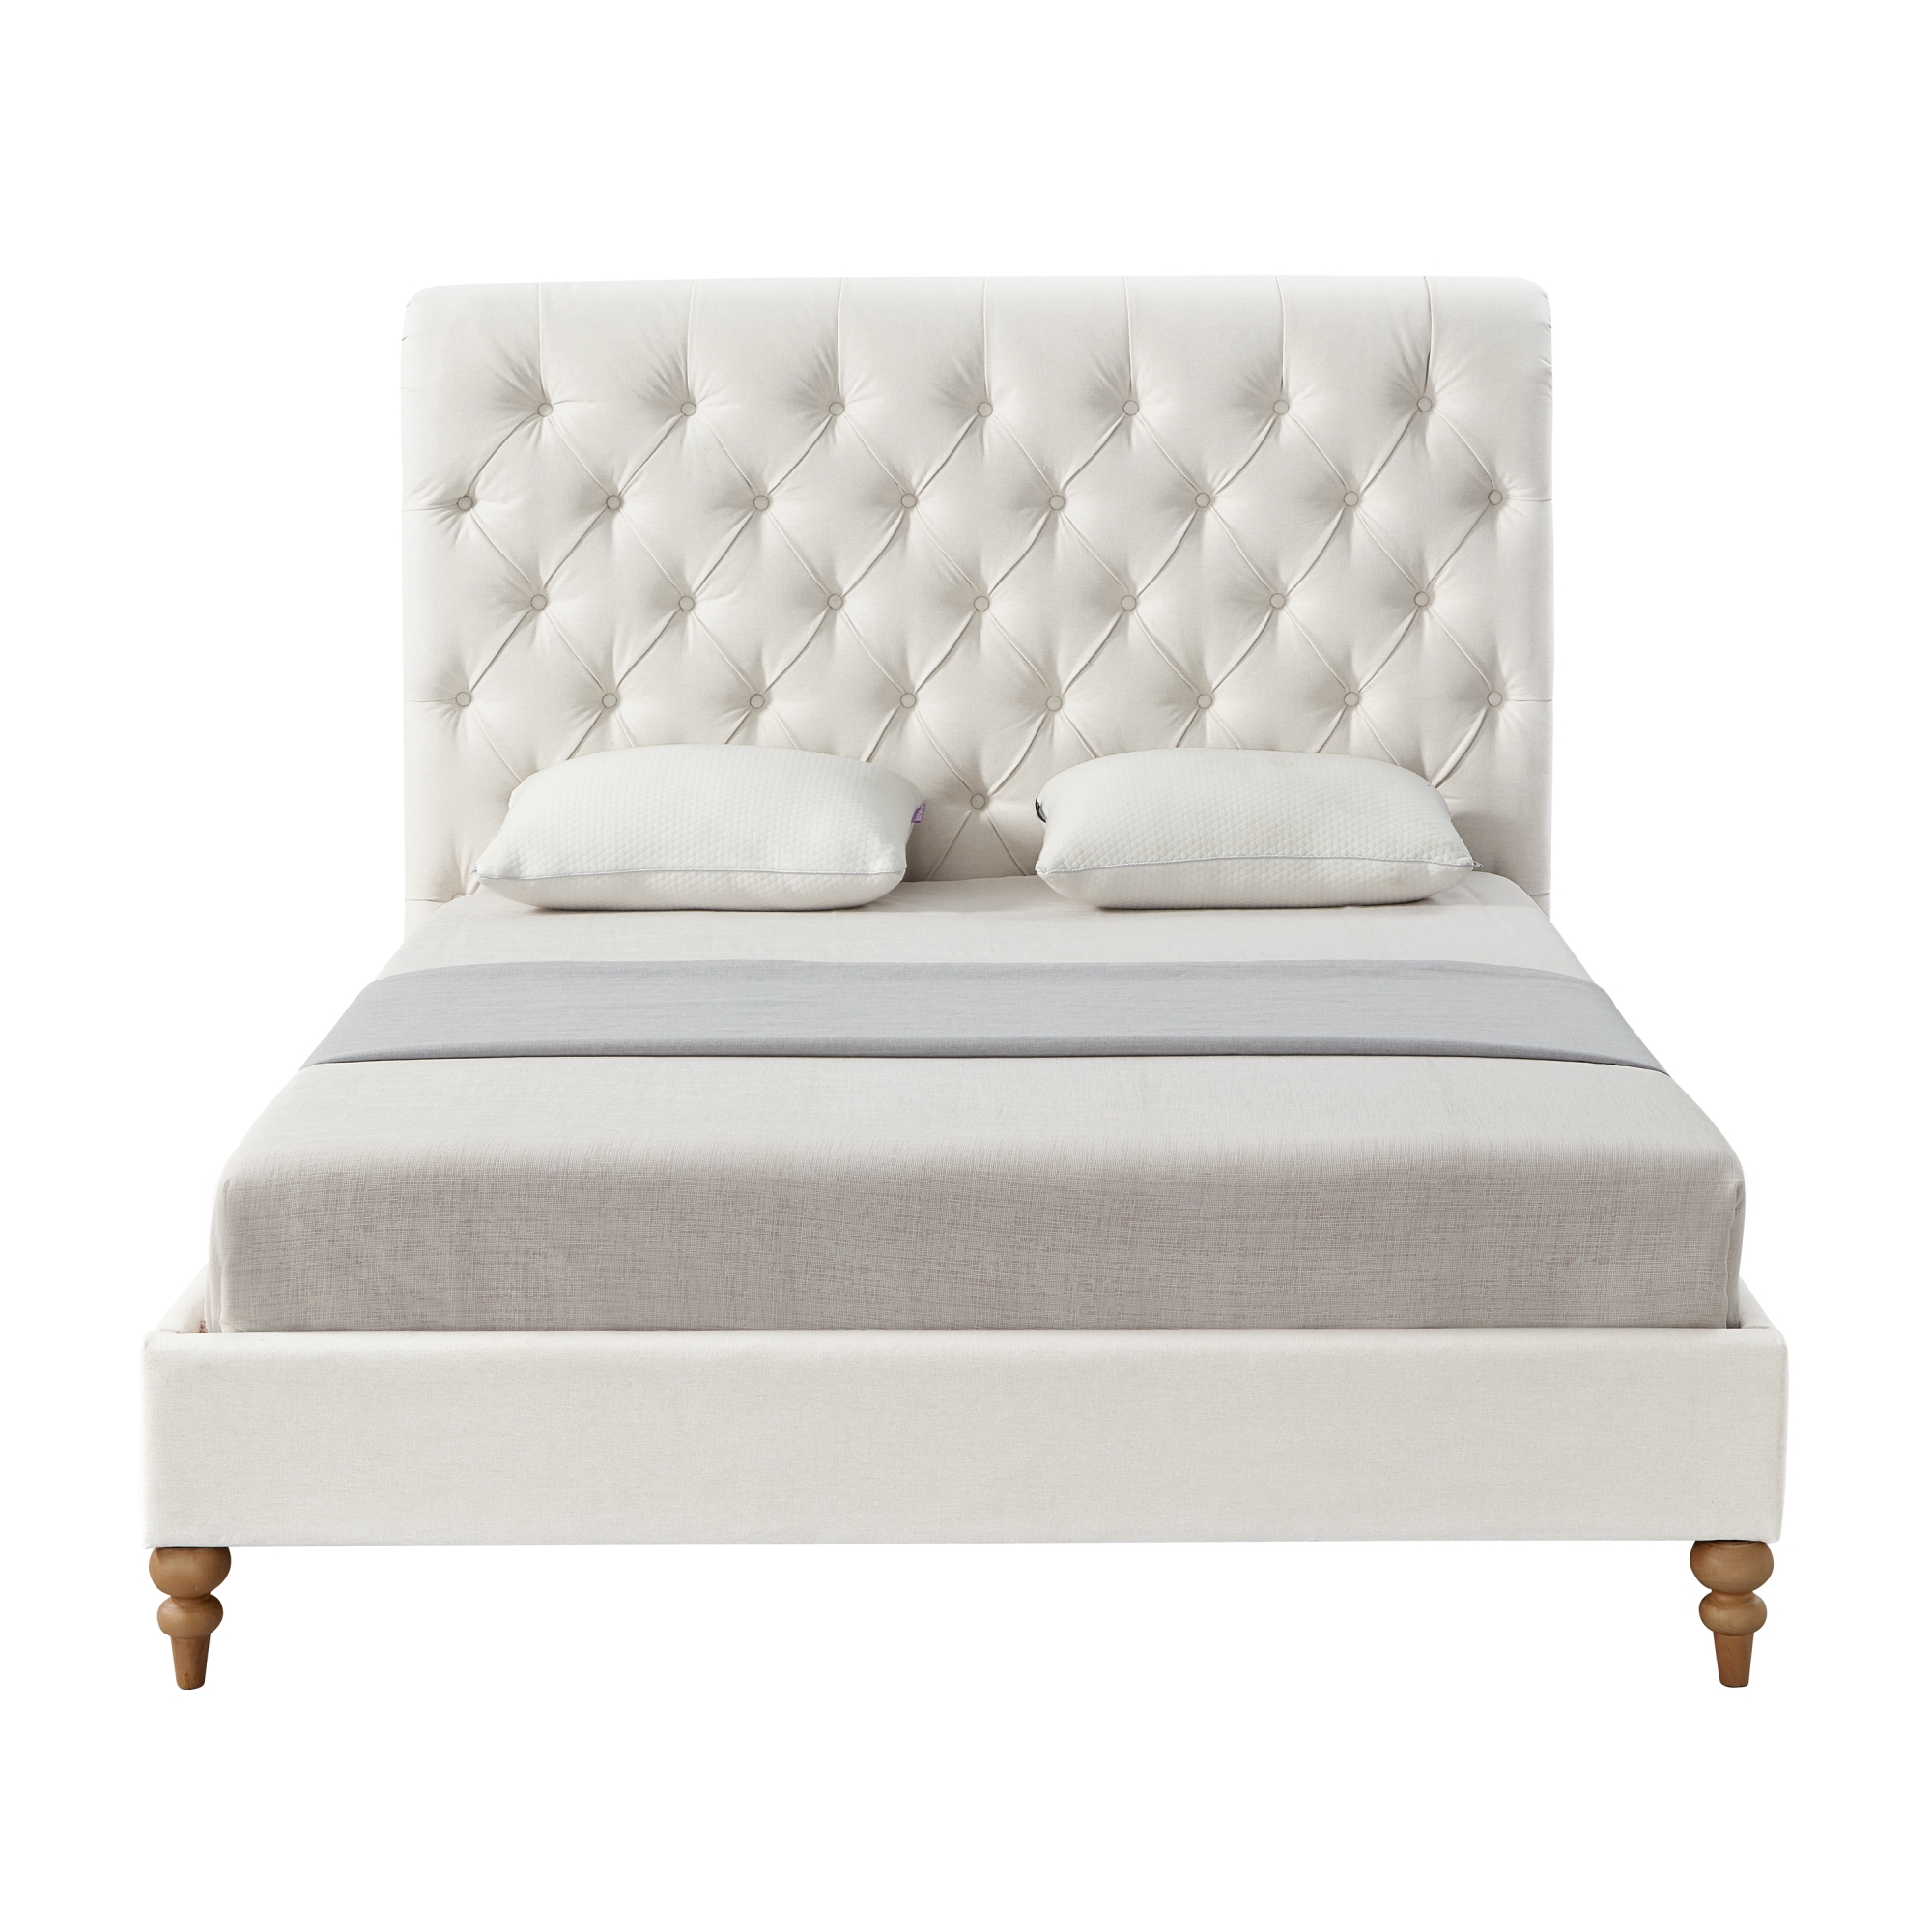 Rustic Manor Xiomara Bed Rolled Top Button Tufted Nailhead Trim Slats Included